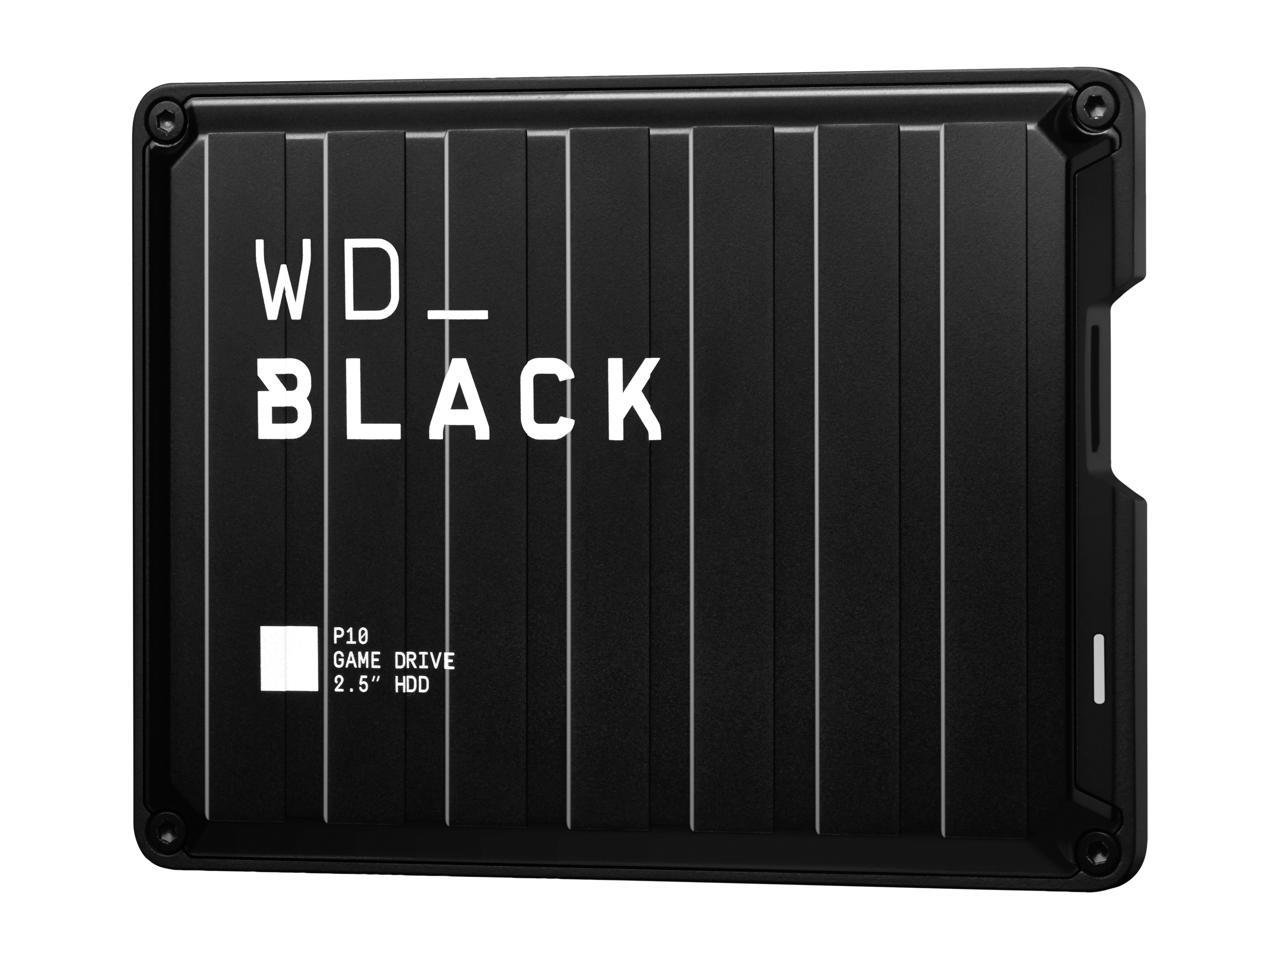 Wd Black 2Tb P10 Game Drive Portable External Hard Drive For Ps5/Ps4/Xbox One/Pc/Mac Usb 3.2 (Wdba2W0020Bbk-Wesn)